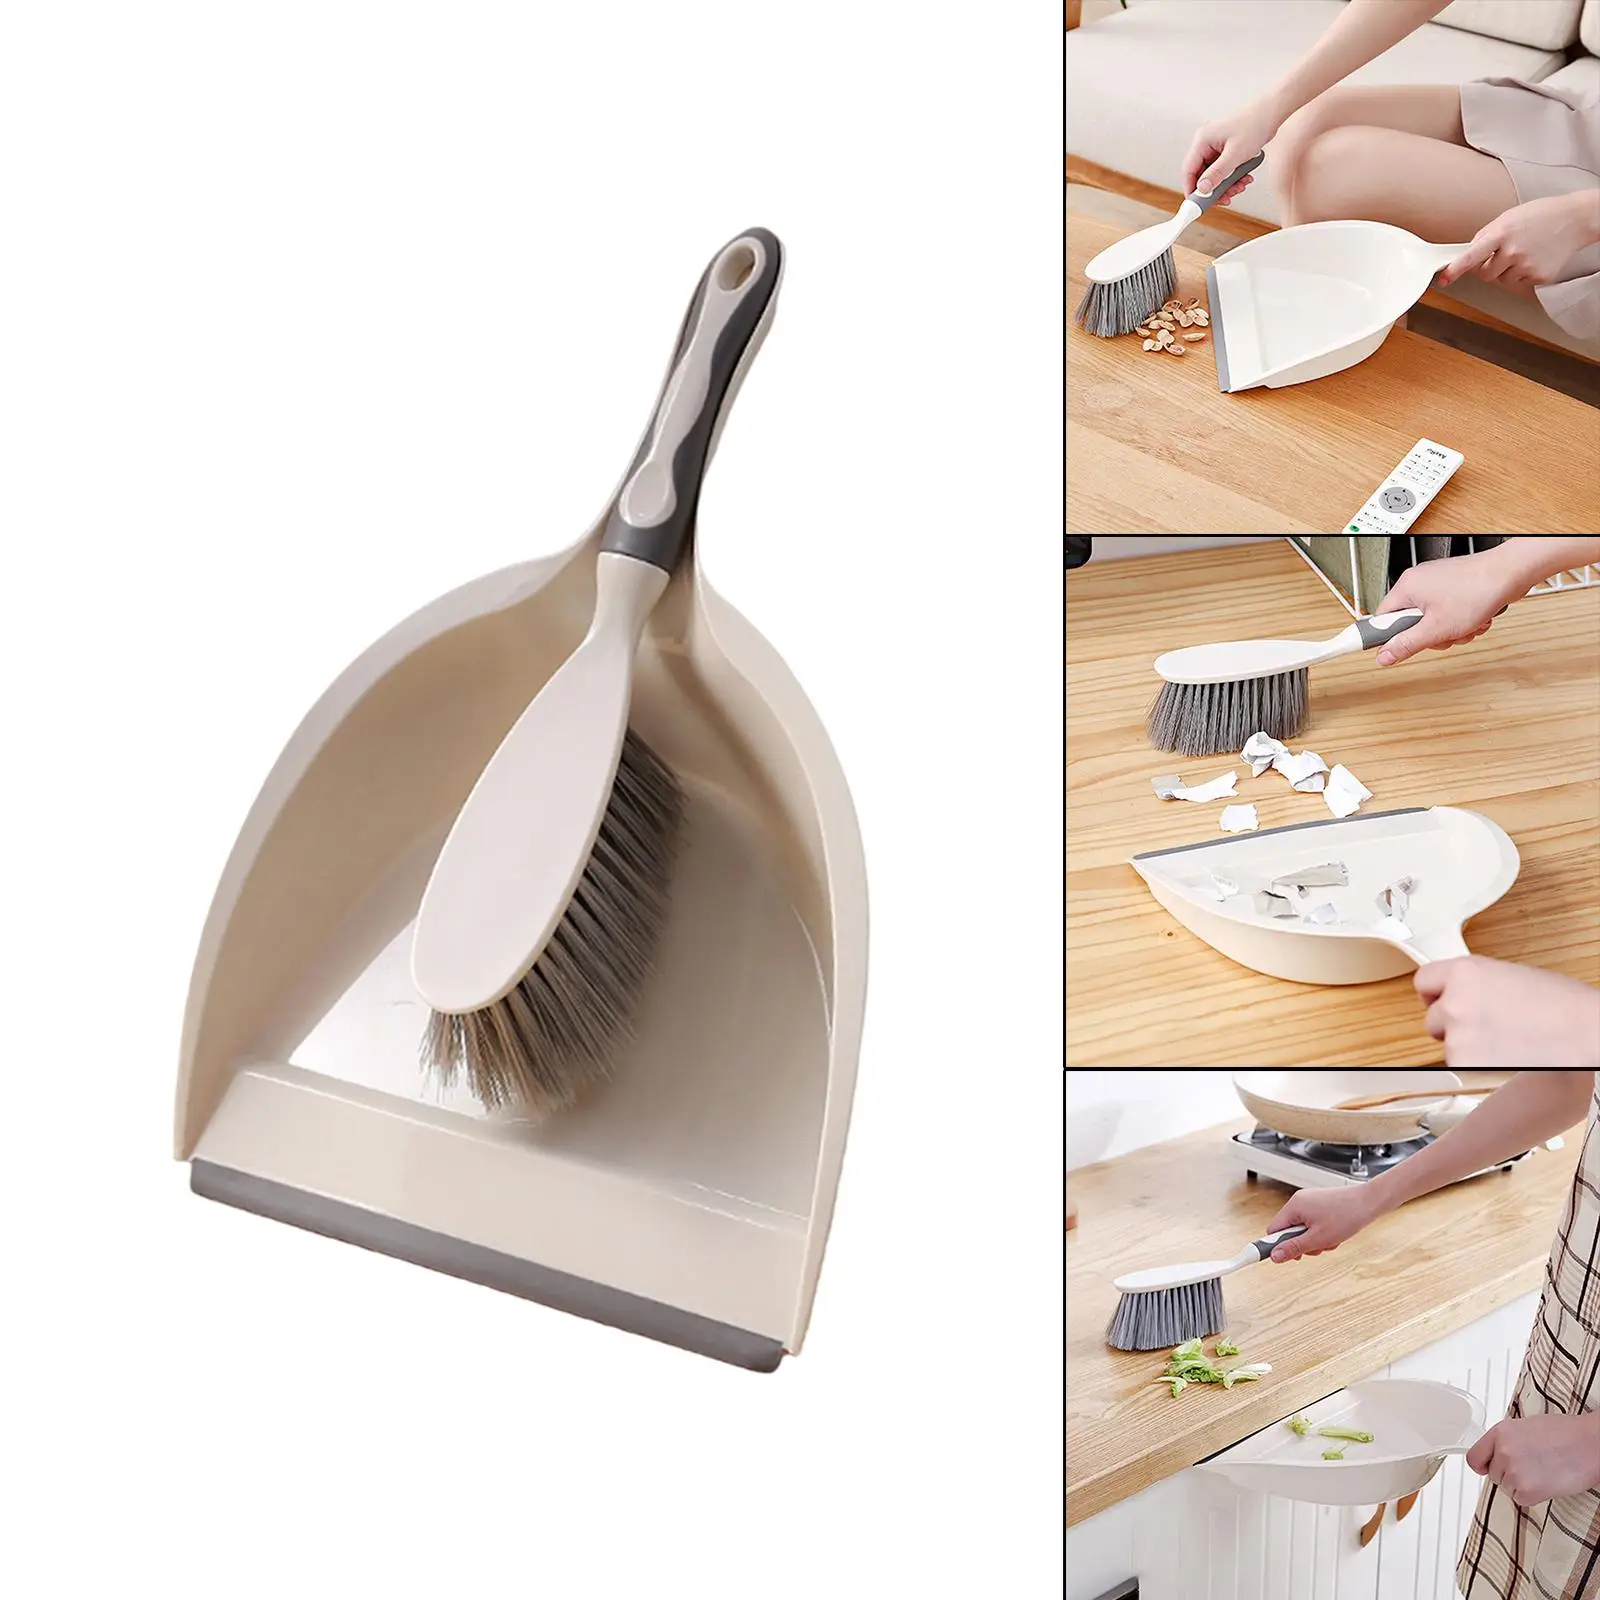 Dust Pans with Brush Whisk Broom Rubber Edge Collect Dust Cleaning Tool Bristles Brush for Desk Countertop Key Board and Car 